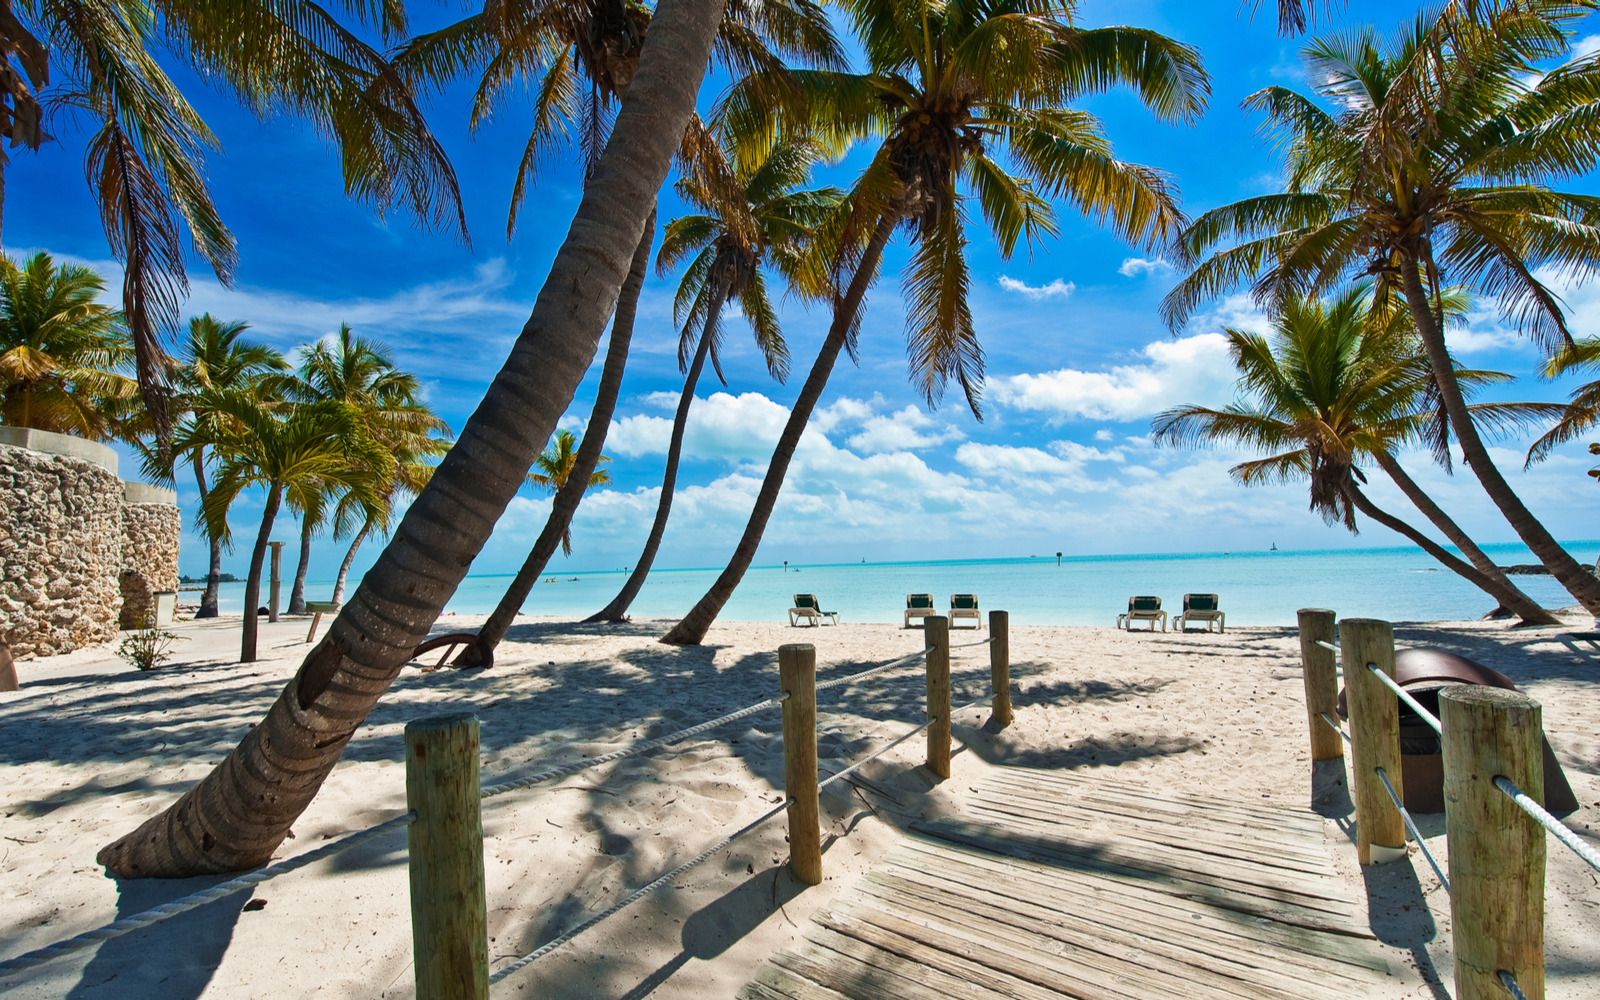 16 Best Things to Do in Key West in 2023